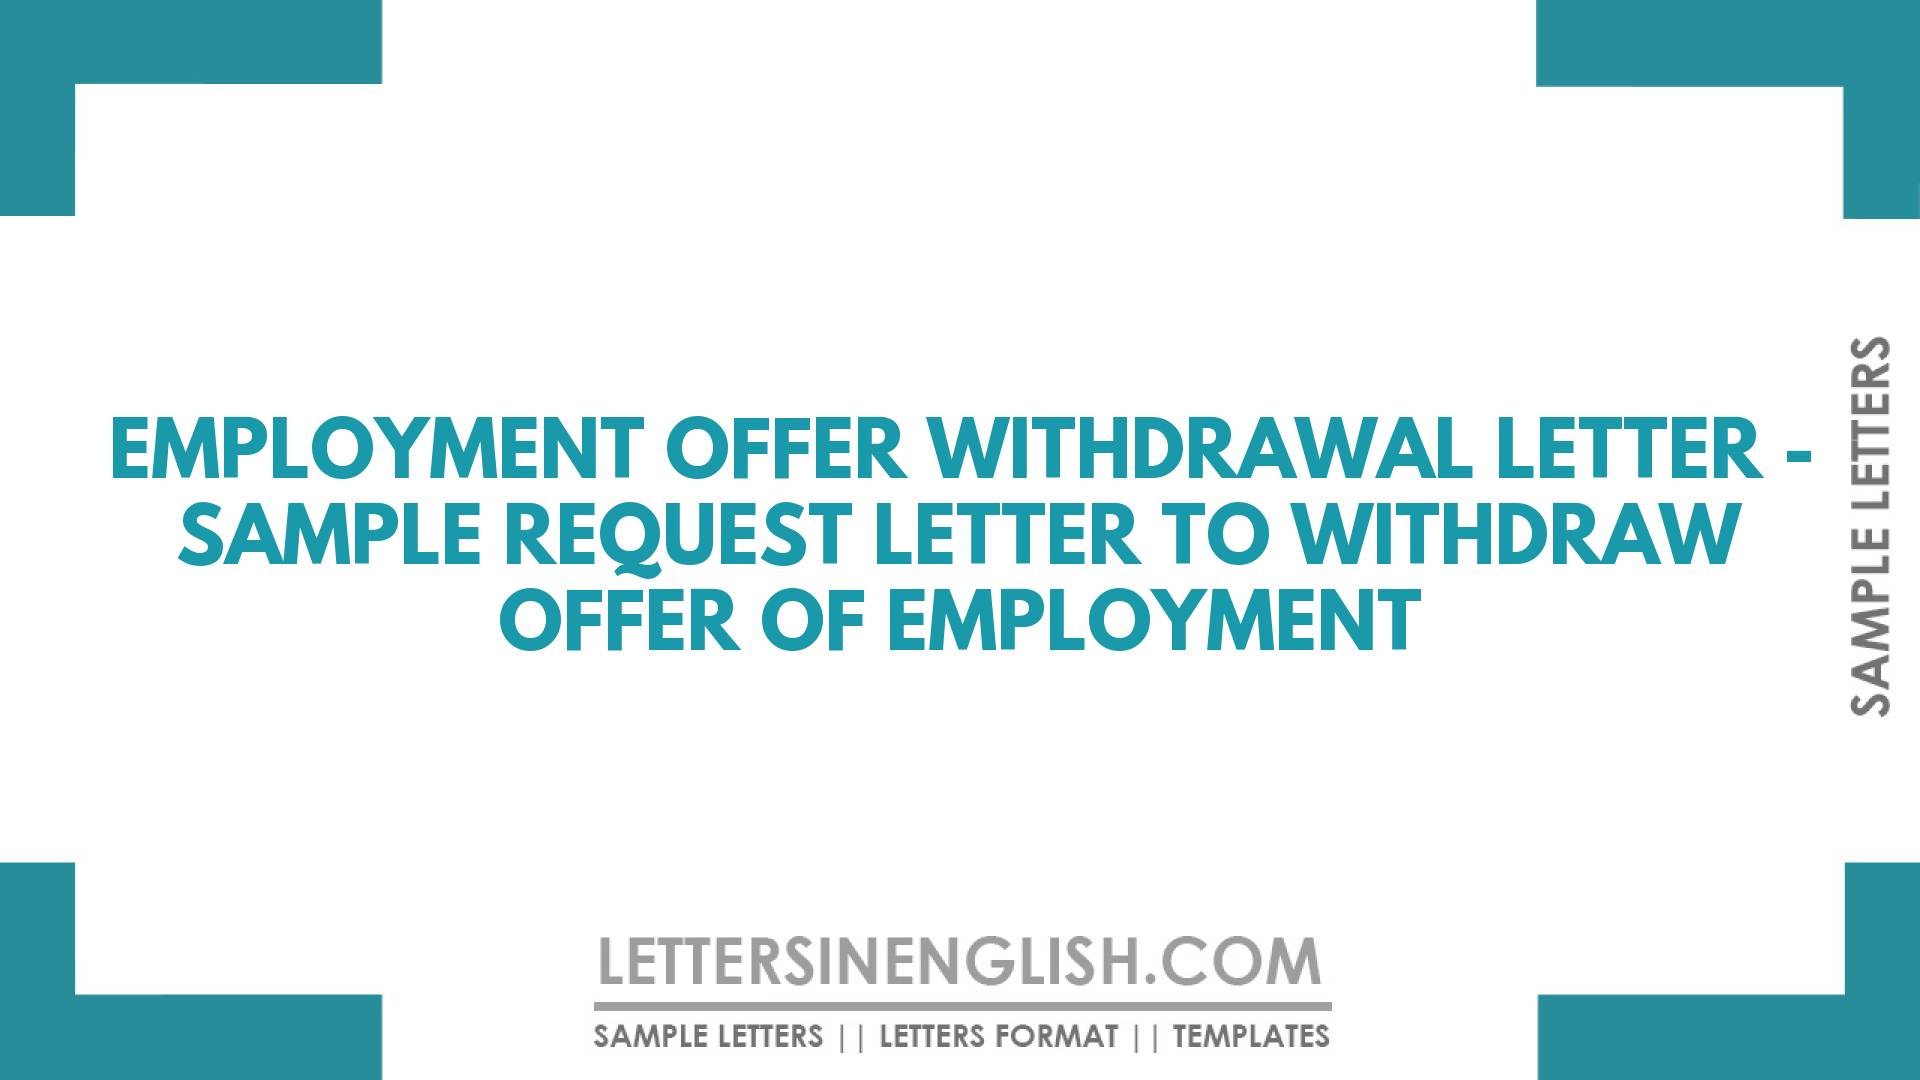 Employment Offer Withdrawal Letter Sample Request Letter To Withdraw Offer Of Employment 7999